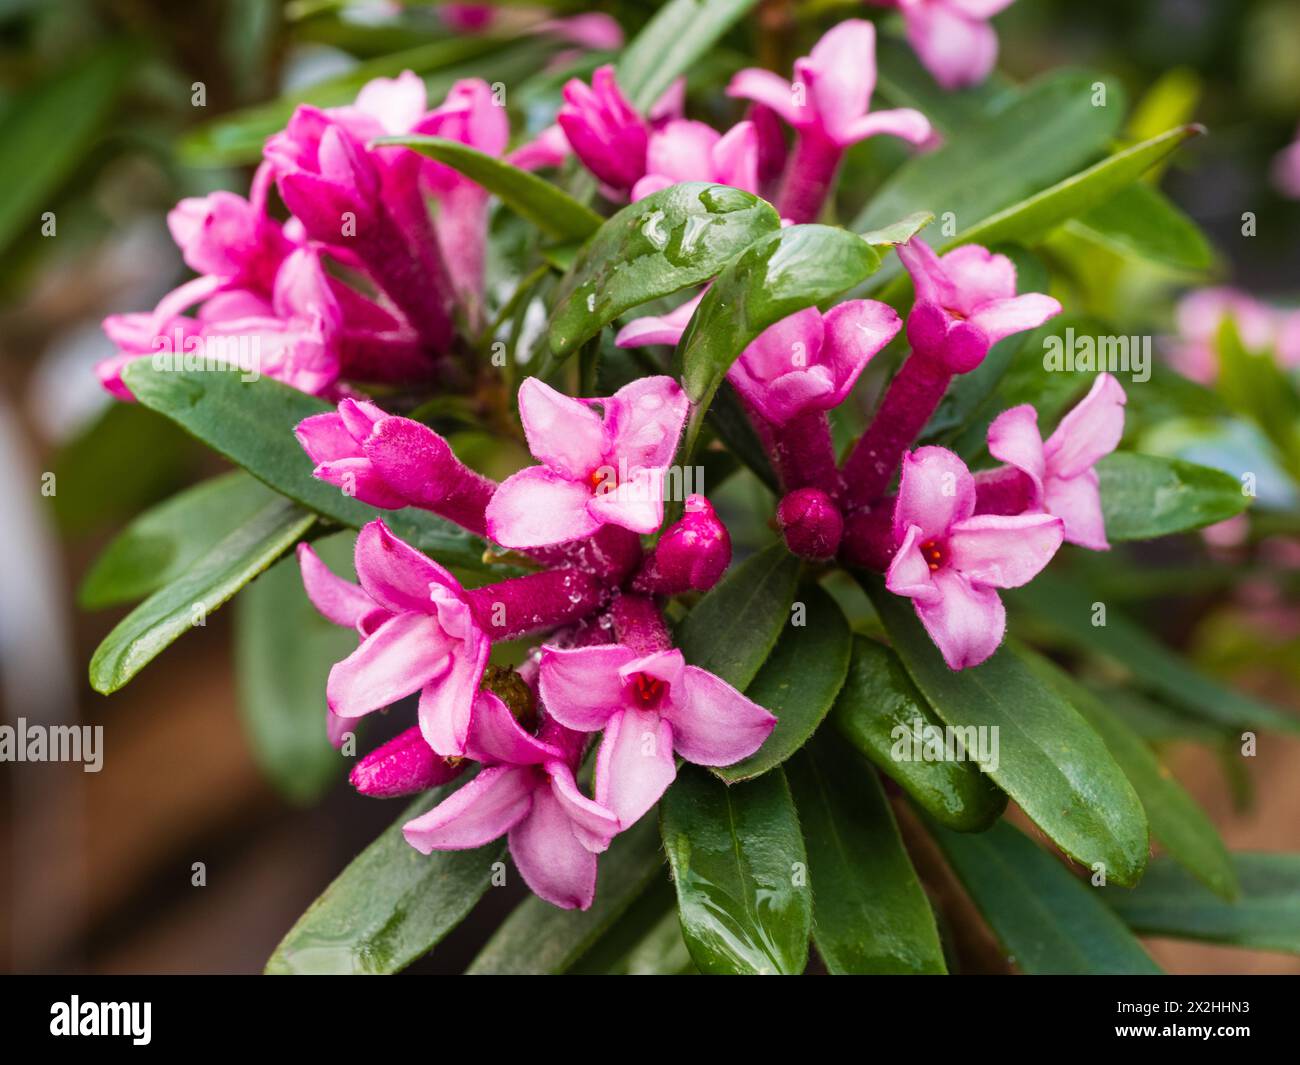 Scented pink flowers of the long blooming hardy evergreen shrub, Daphne x transatlantica 'Pink Fragrance' Stock Photo